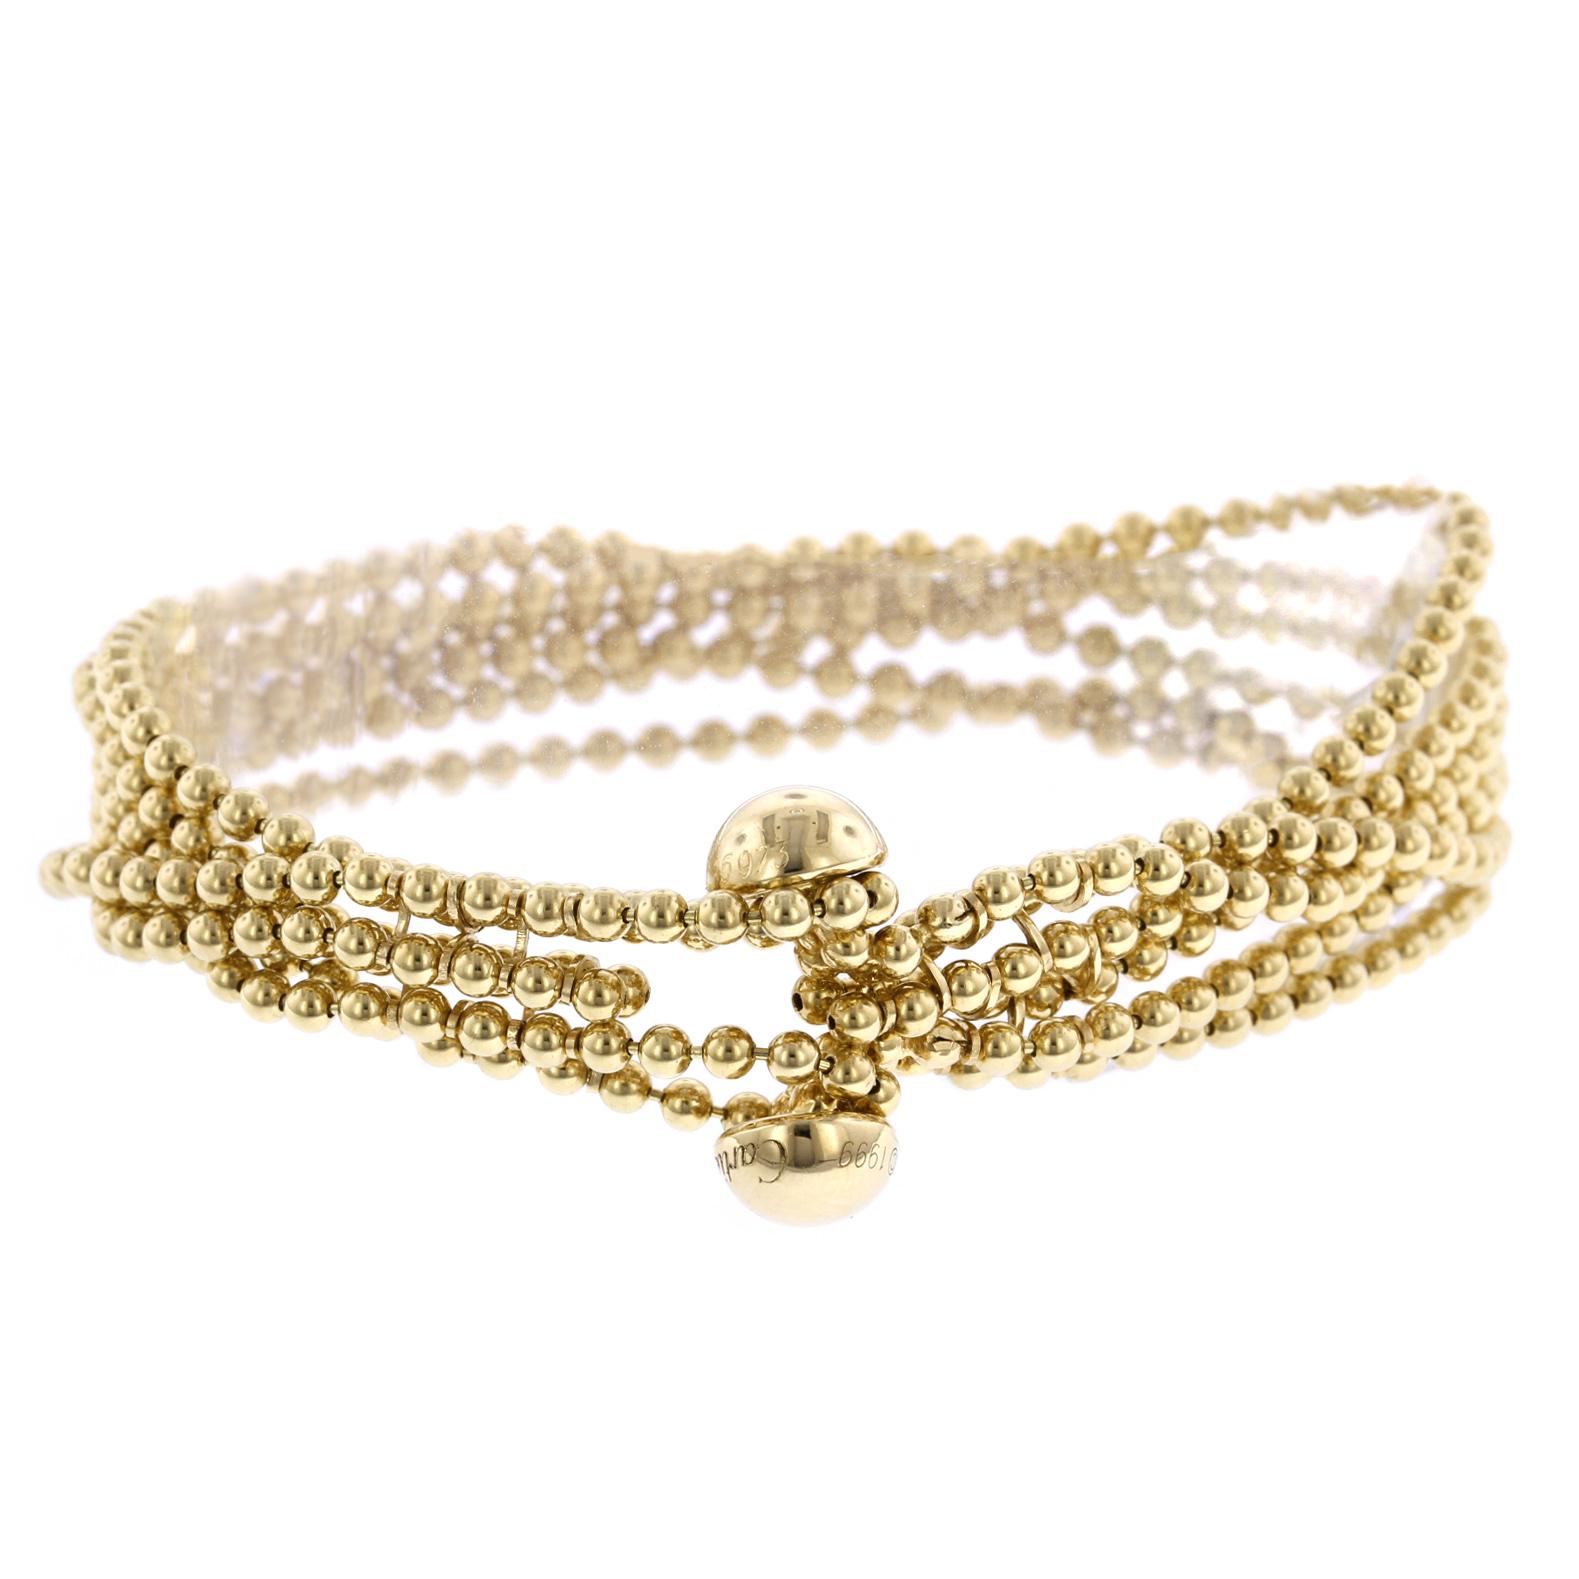 Cartier 18K Yellow Gold Draperie Bracelet. The bracelet is designed with six
rows of gold bead chain completed by a button clasp, #I15973, length 6 1/4